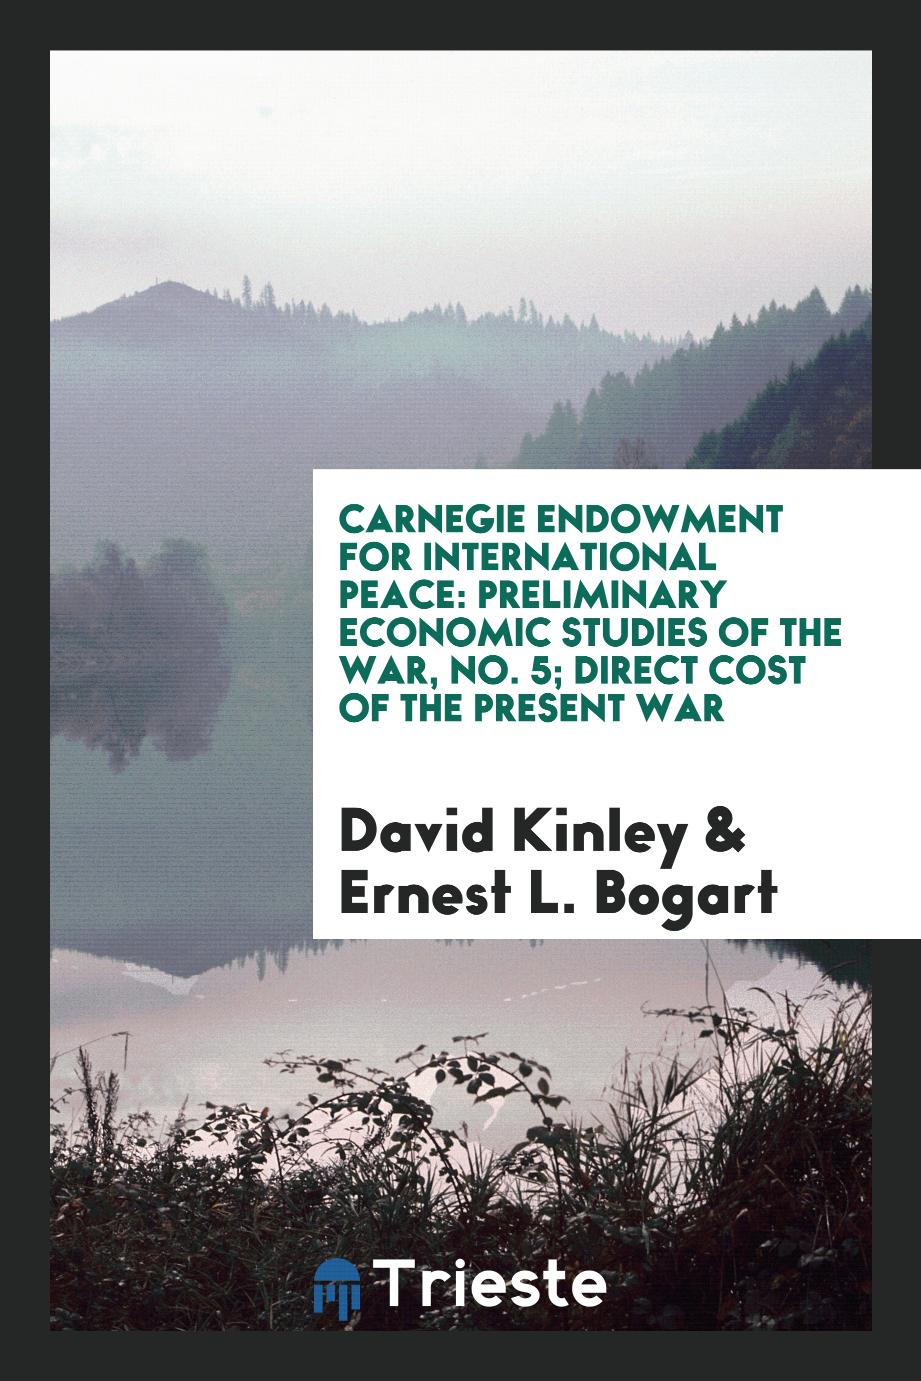 Carnegie Endowment for International Peace: Preliminary Economic Studies of the War, No. 5; Direct cost of the present war